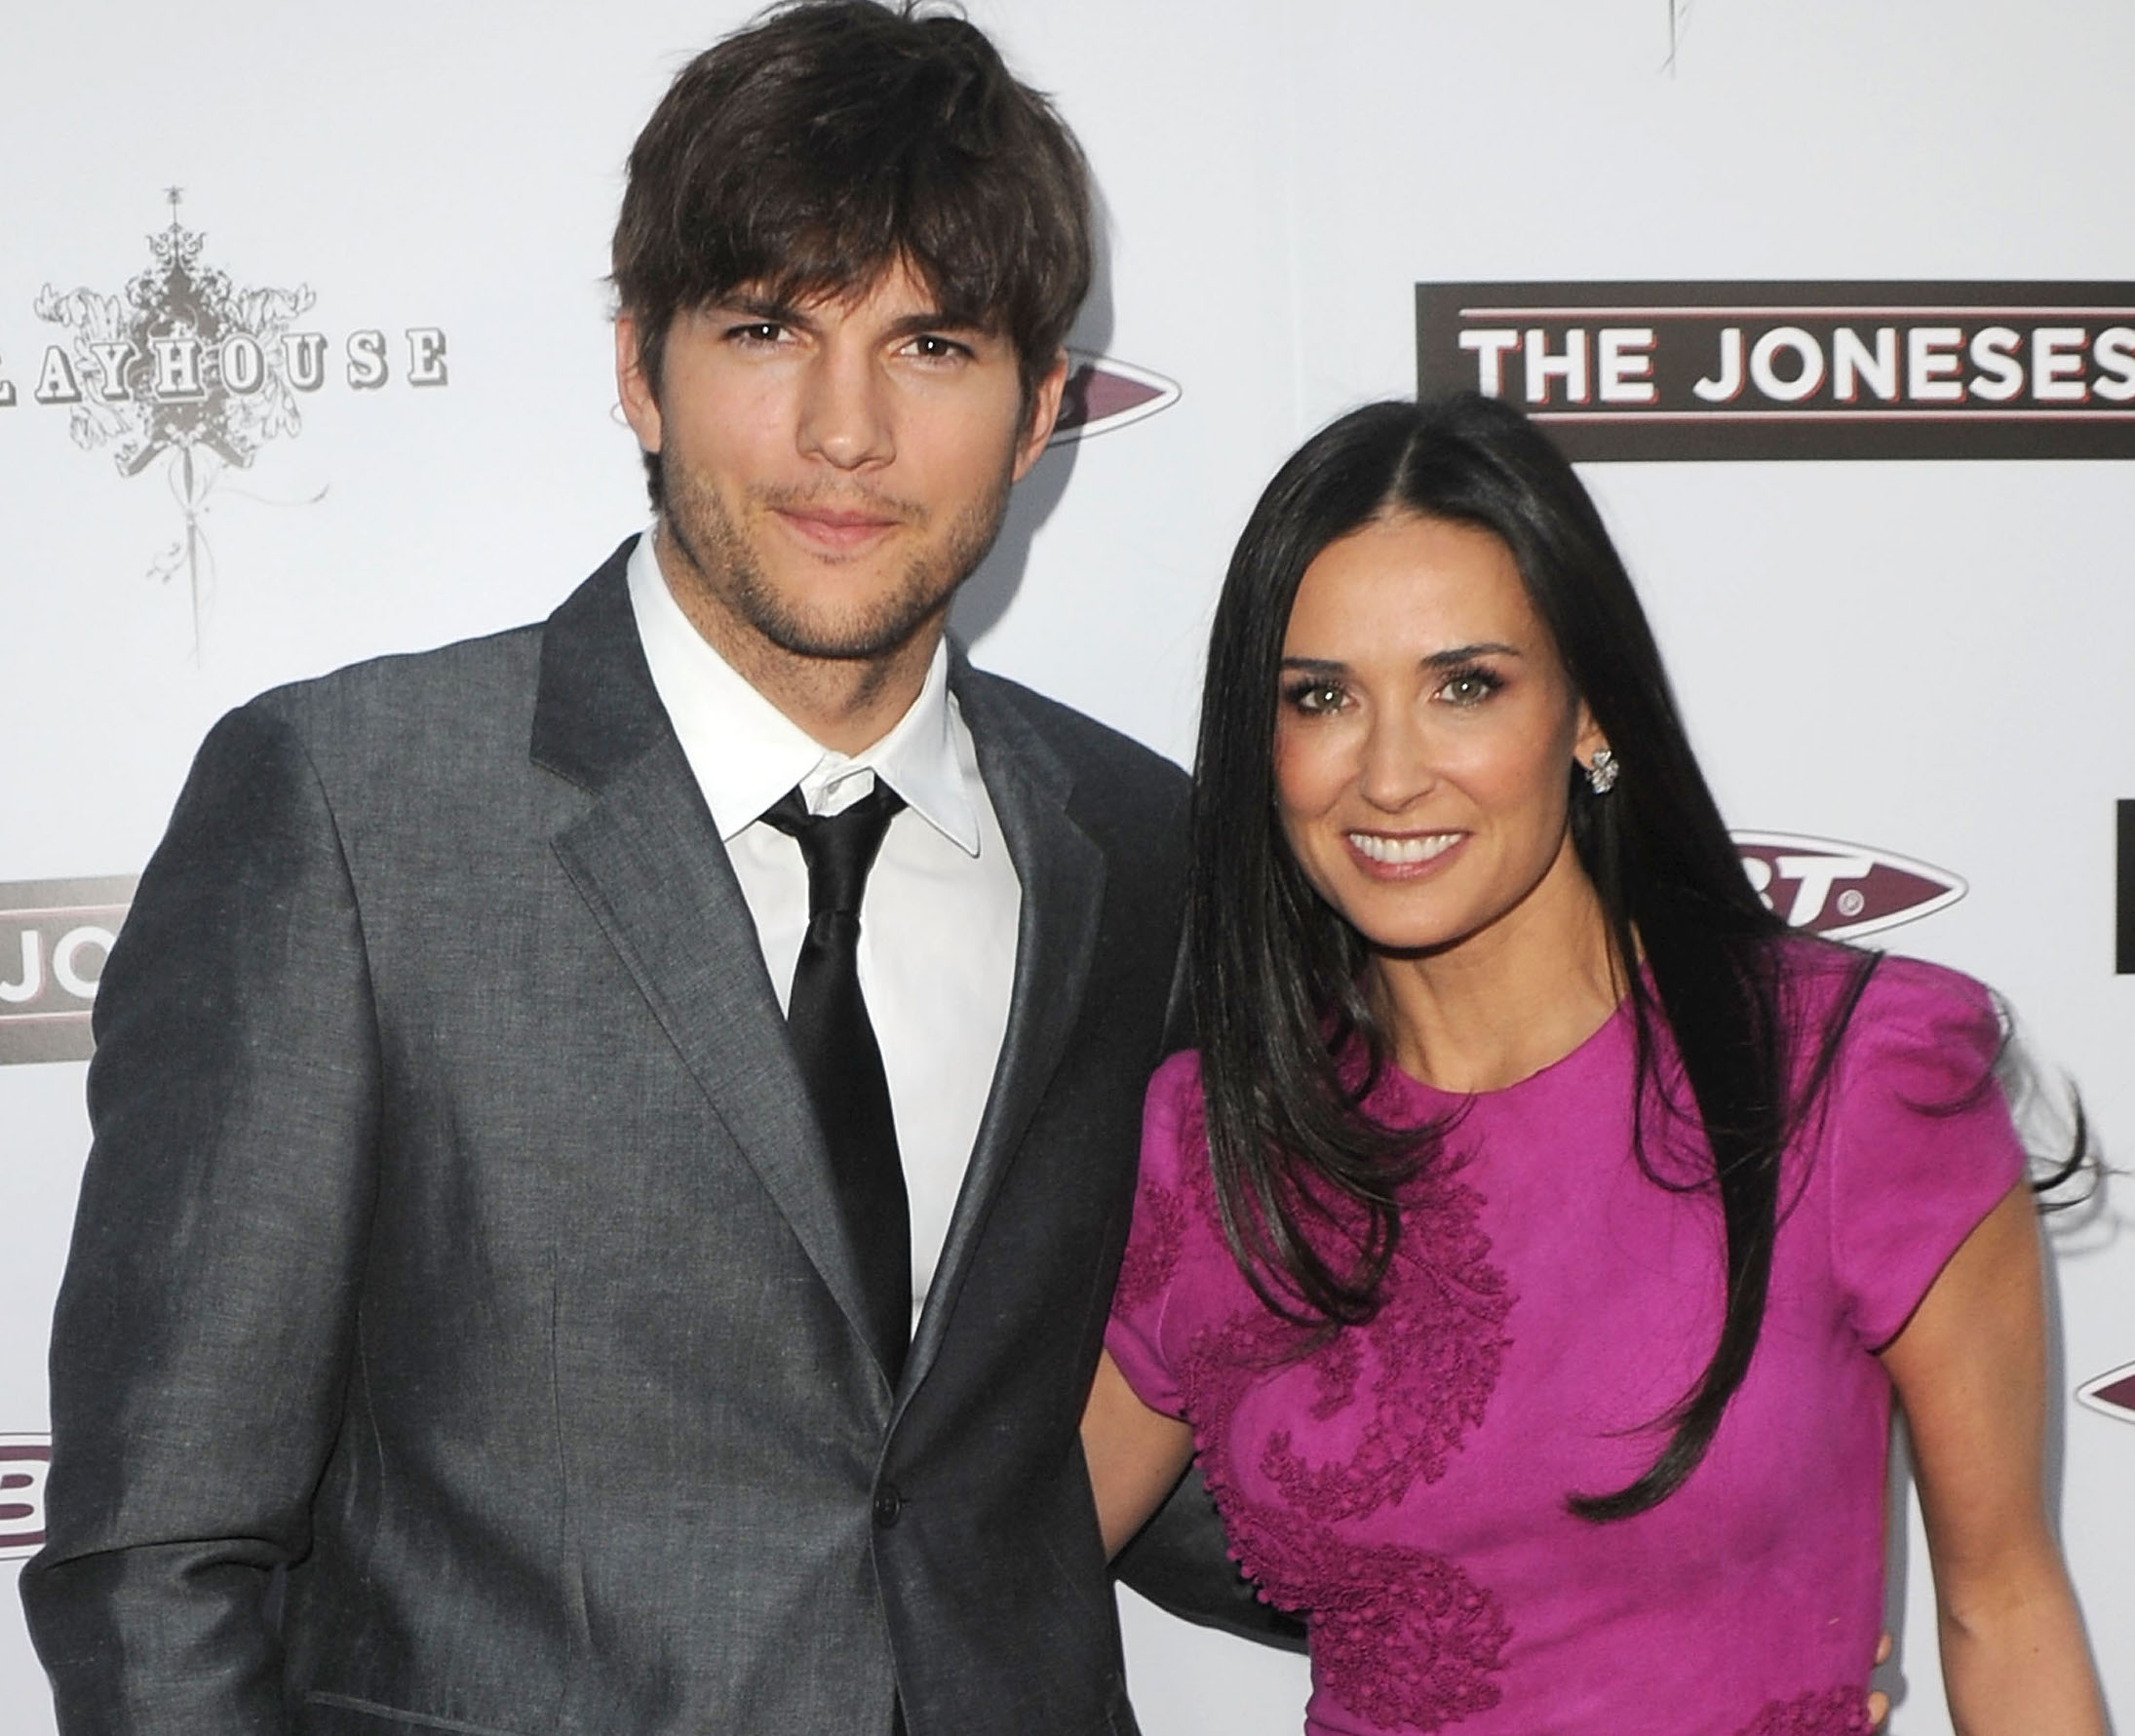 Demi Moore Is Planning a Tell-All About Ex Ashton Kutcher (EXCLUSIVE)